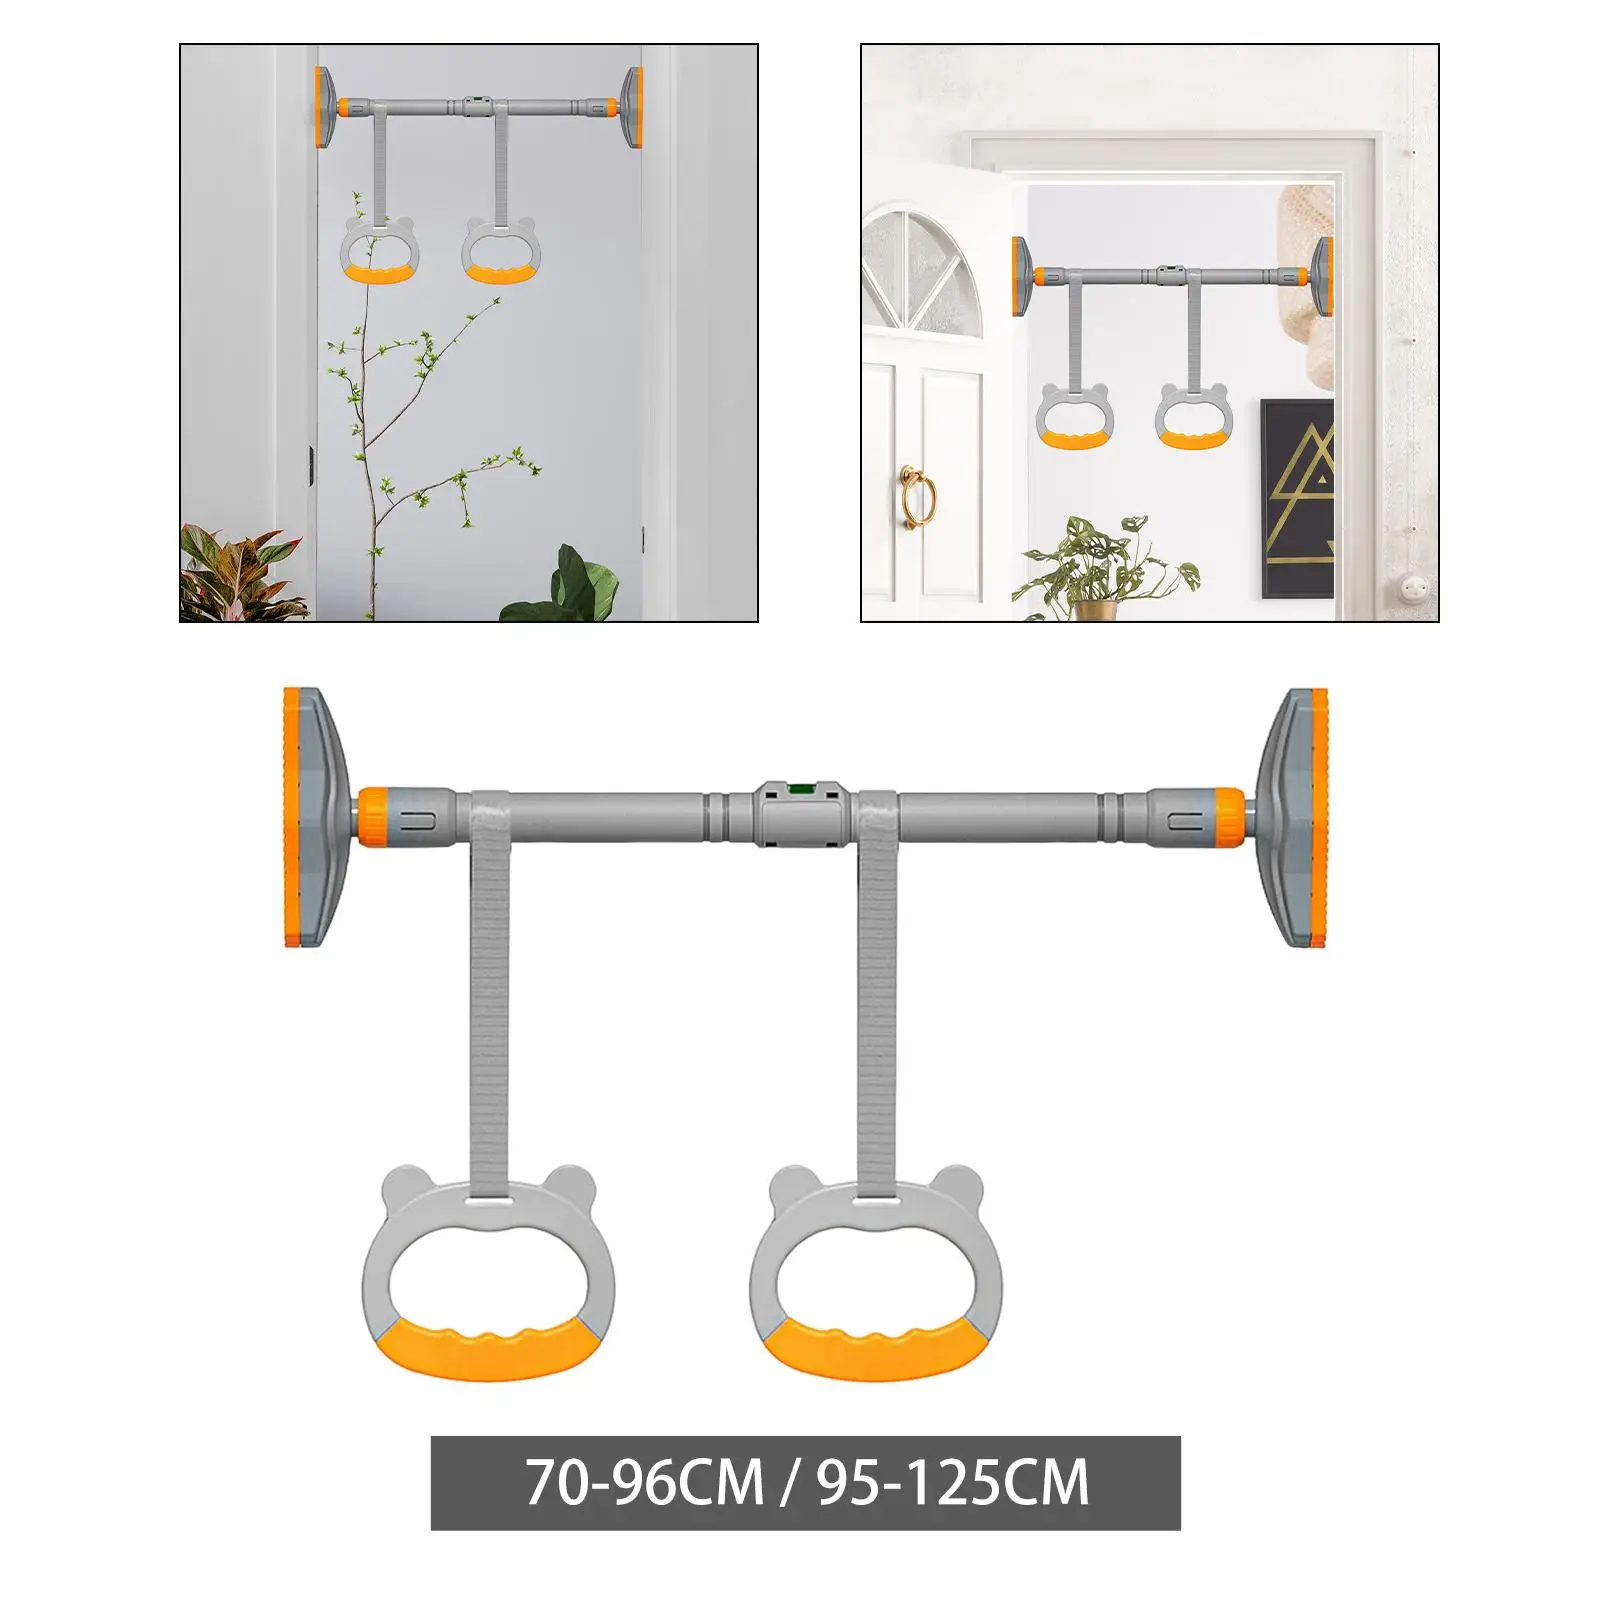 2018electronicshop Door Horizontal Bar with Exercise Rings Heavy Duty Pull up